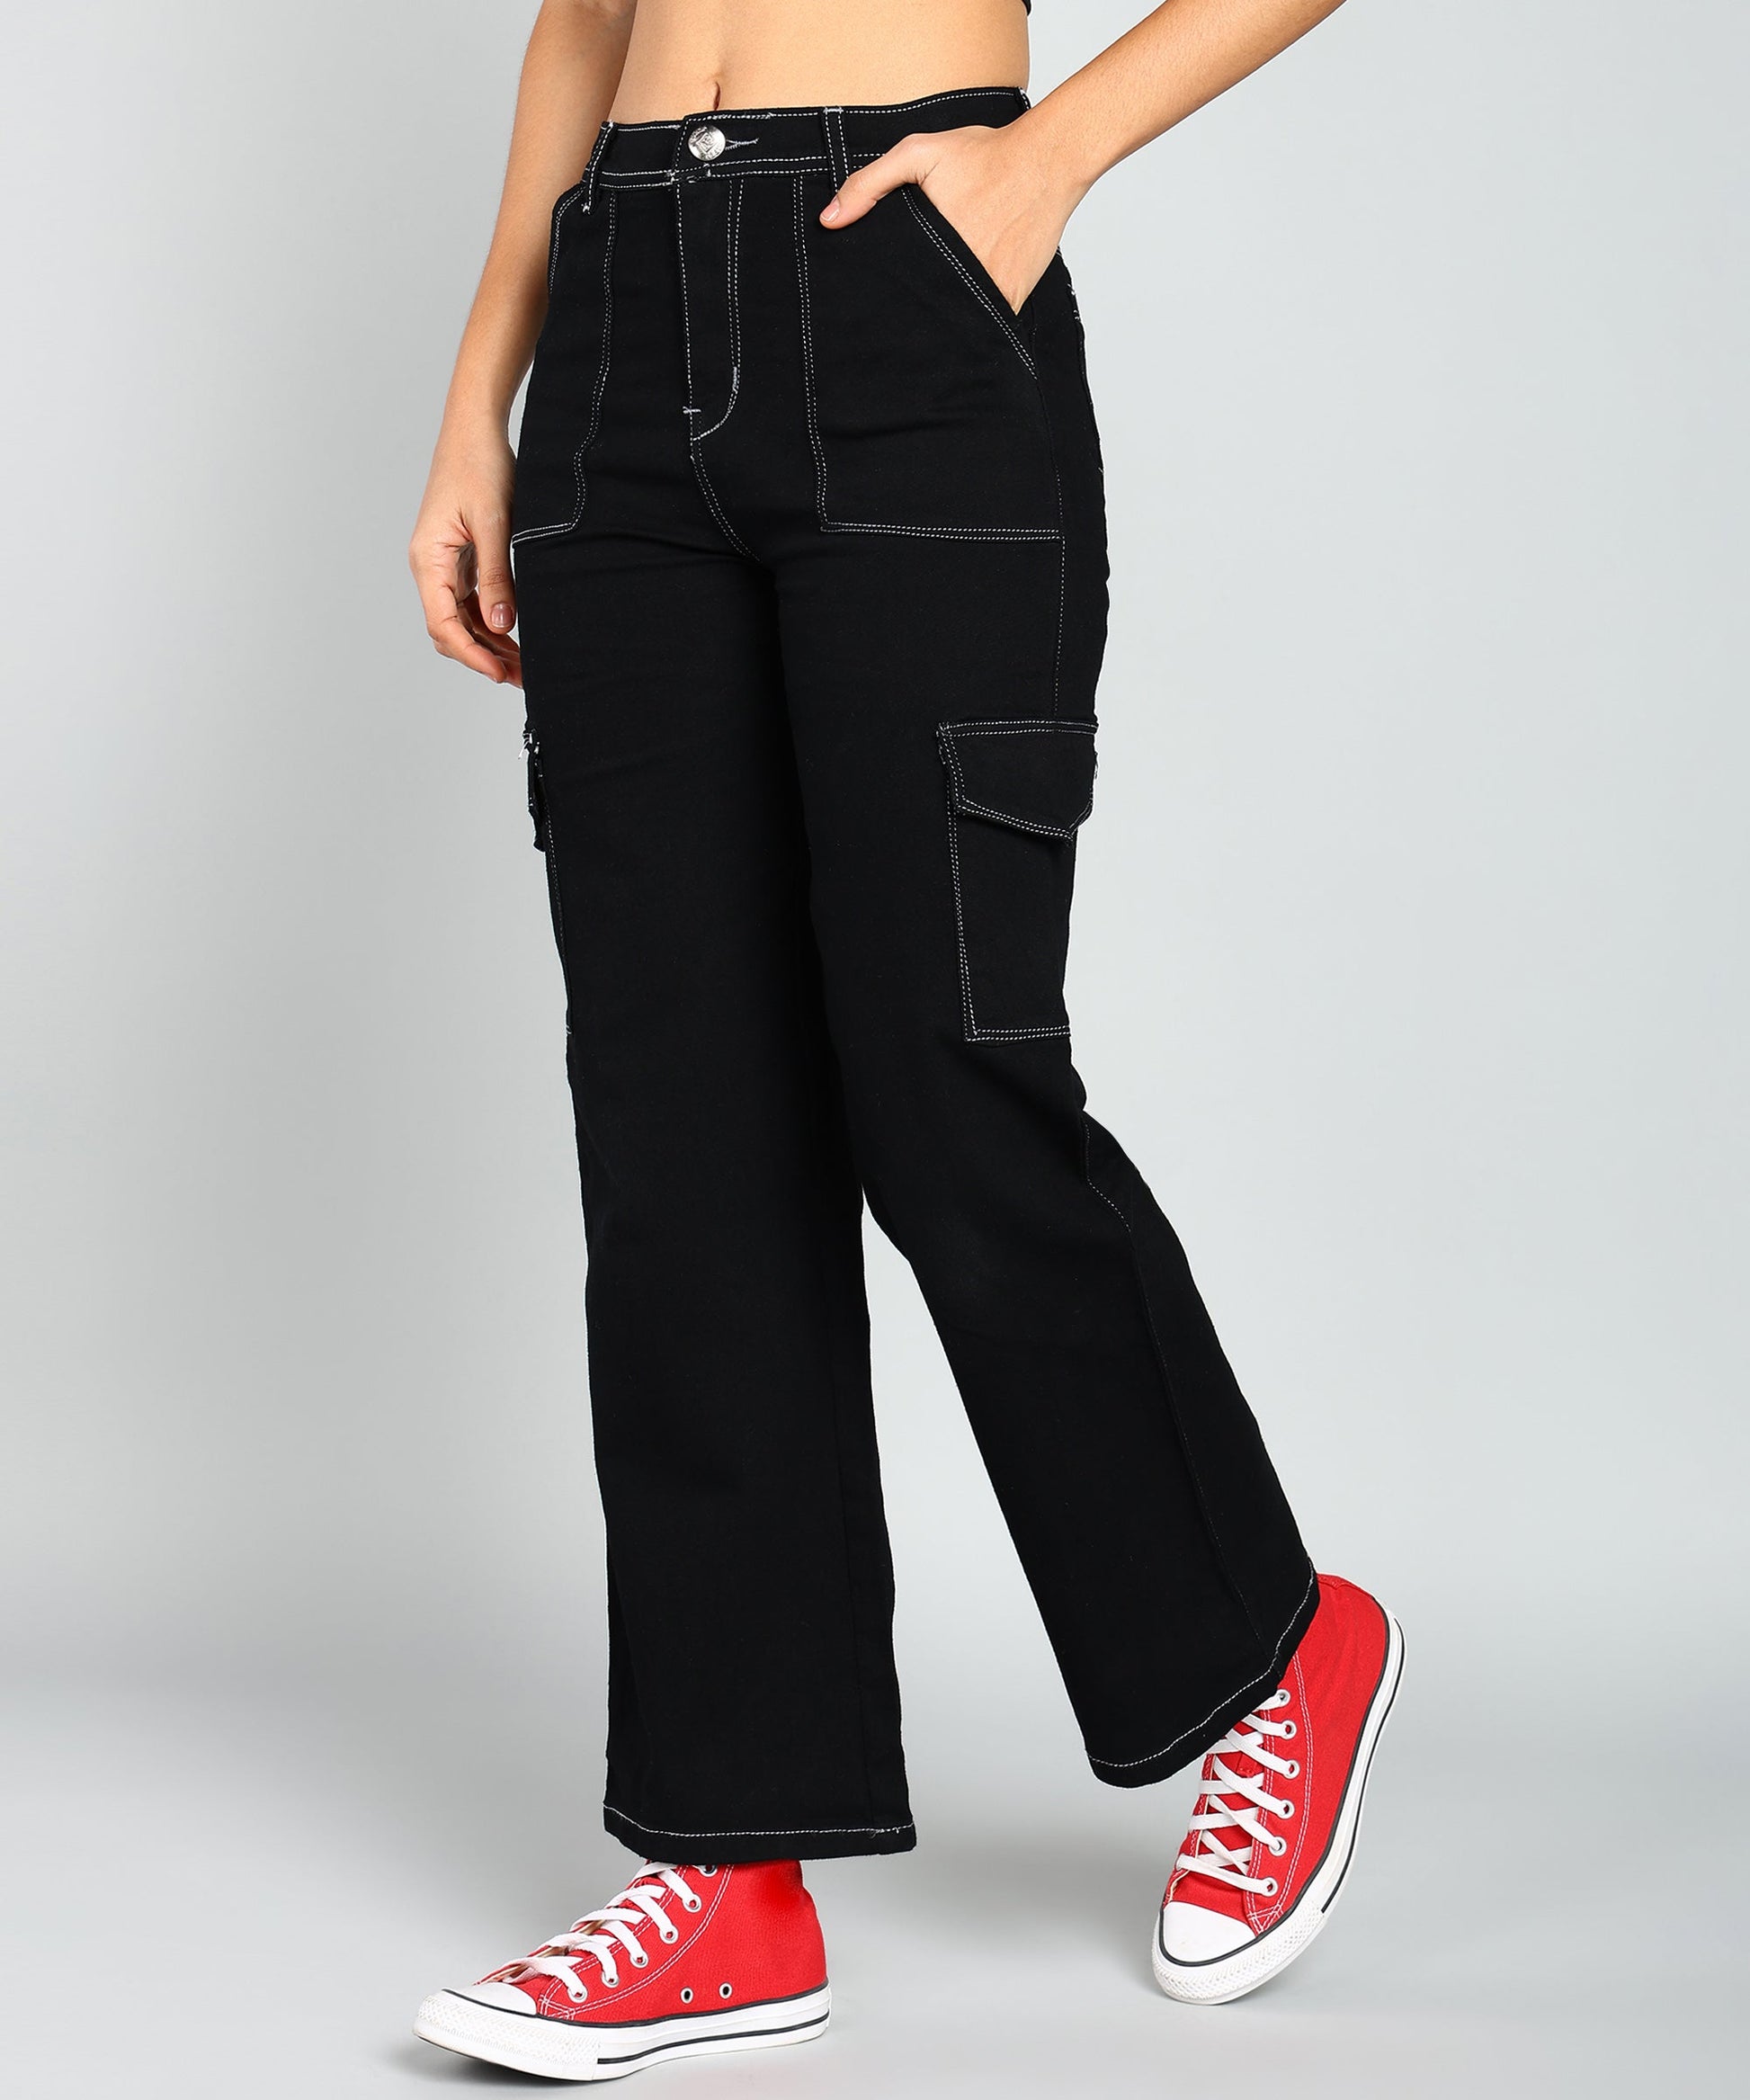 Straight Fit Stretchable Cargo Black Jeans - NiftyJeans